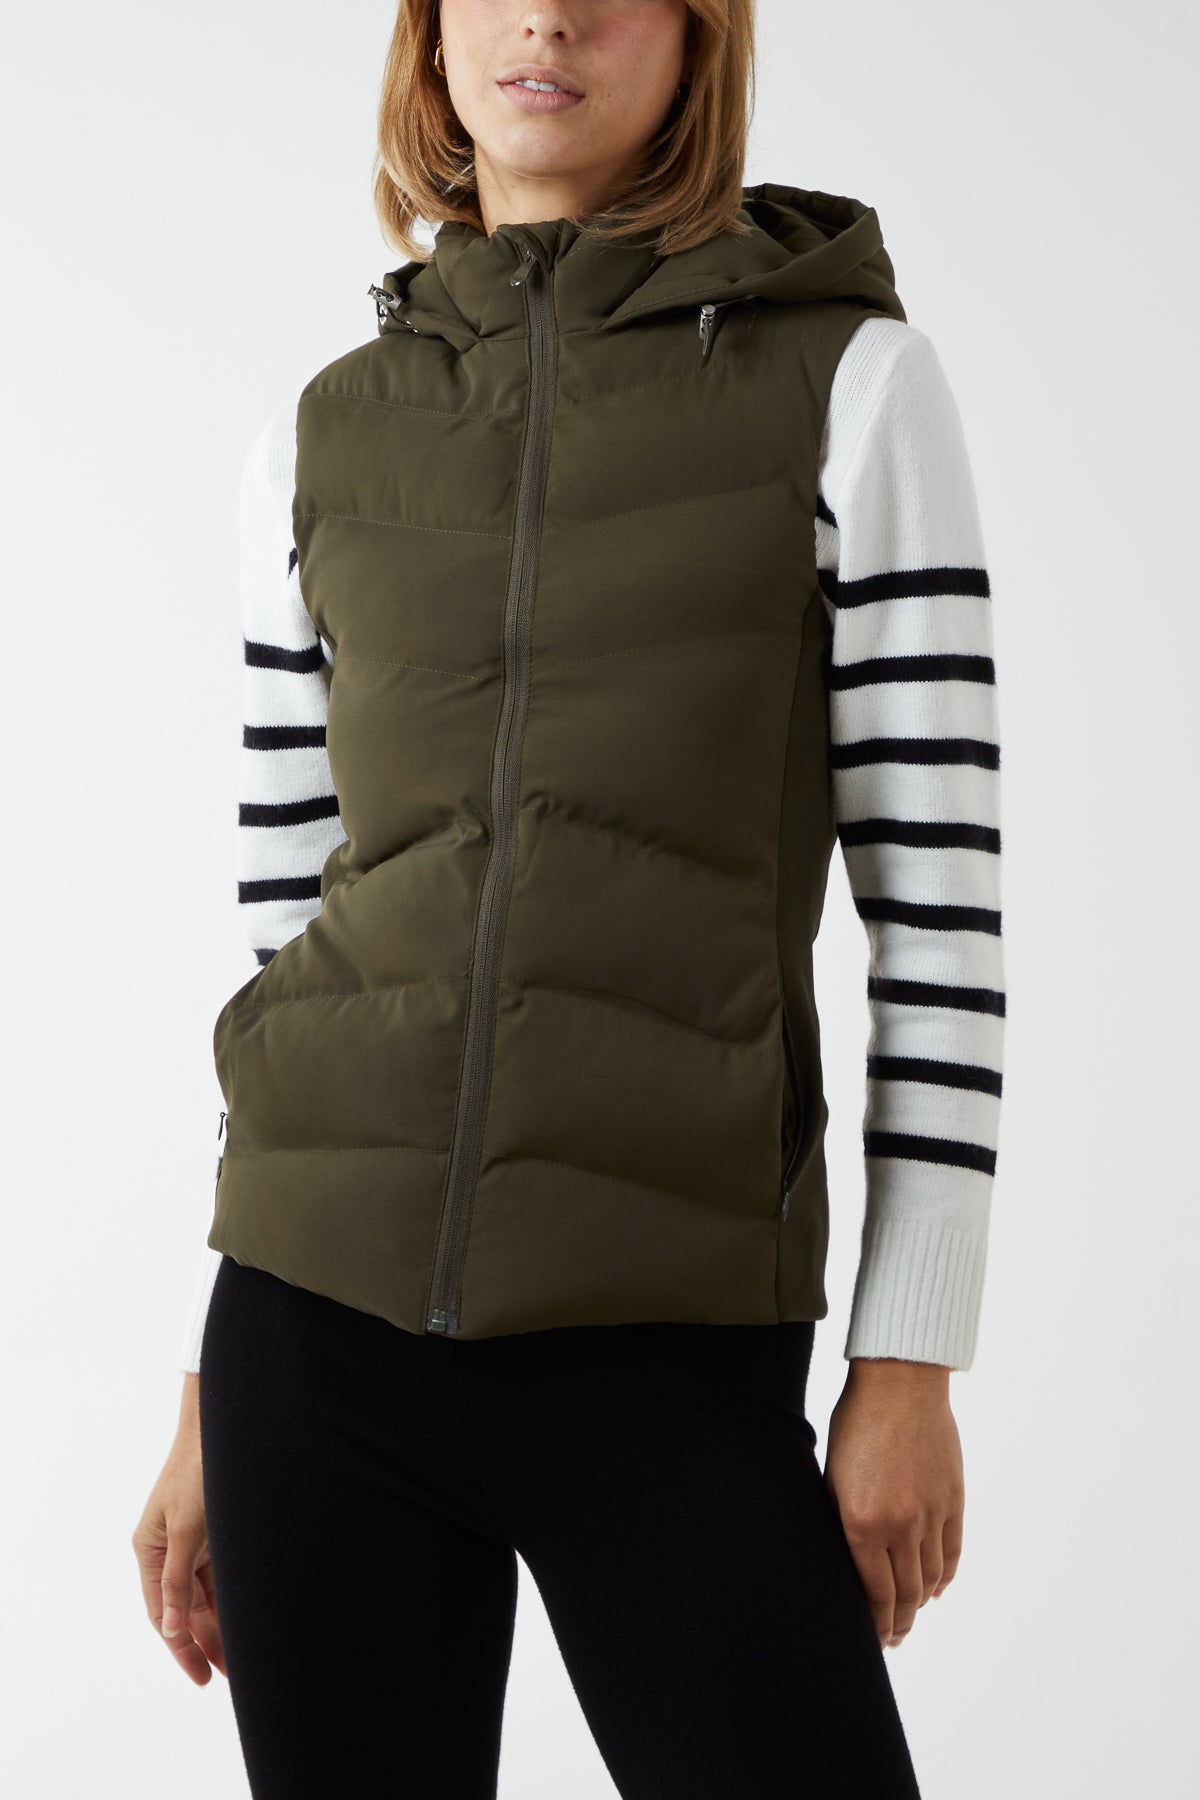 Padded Short Gilet With Pockets & Hood